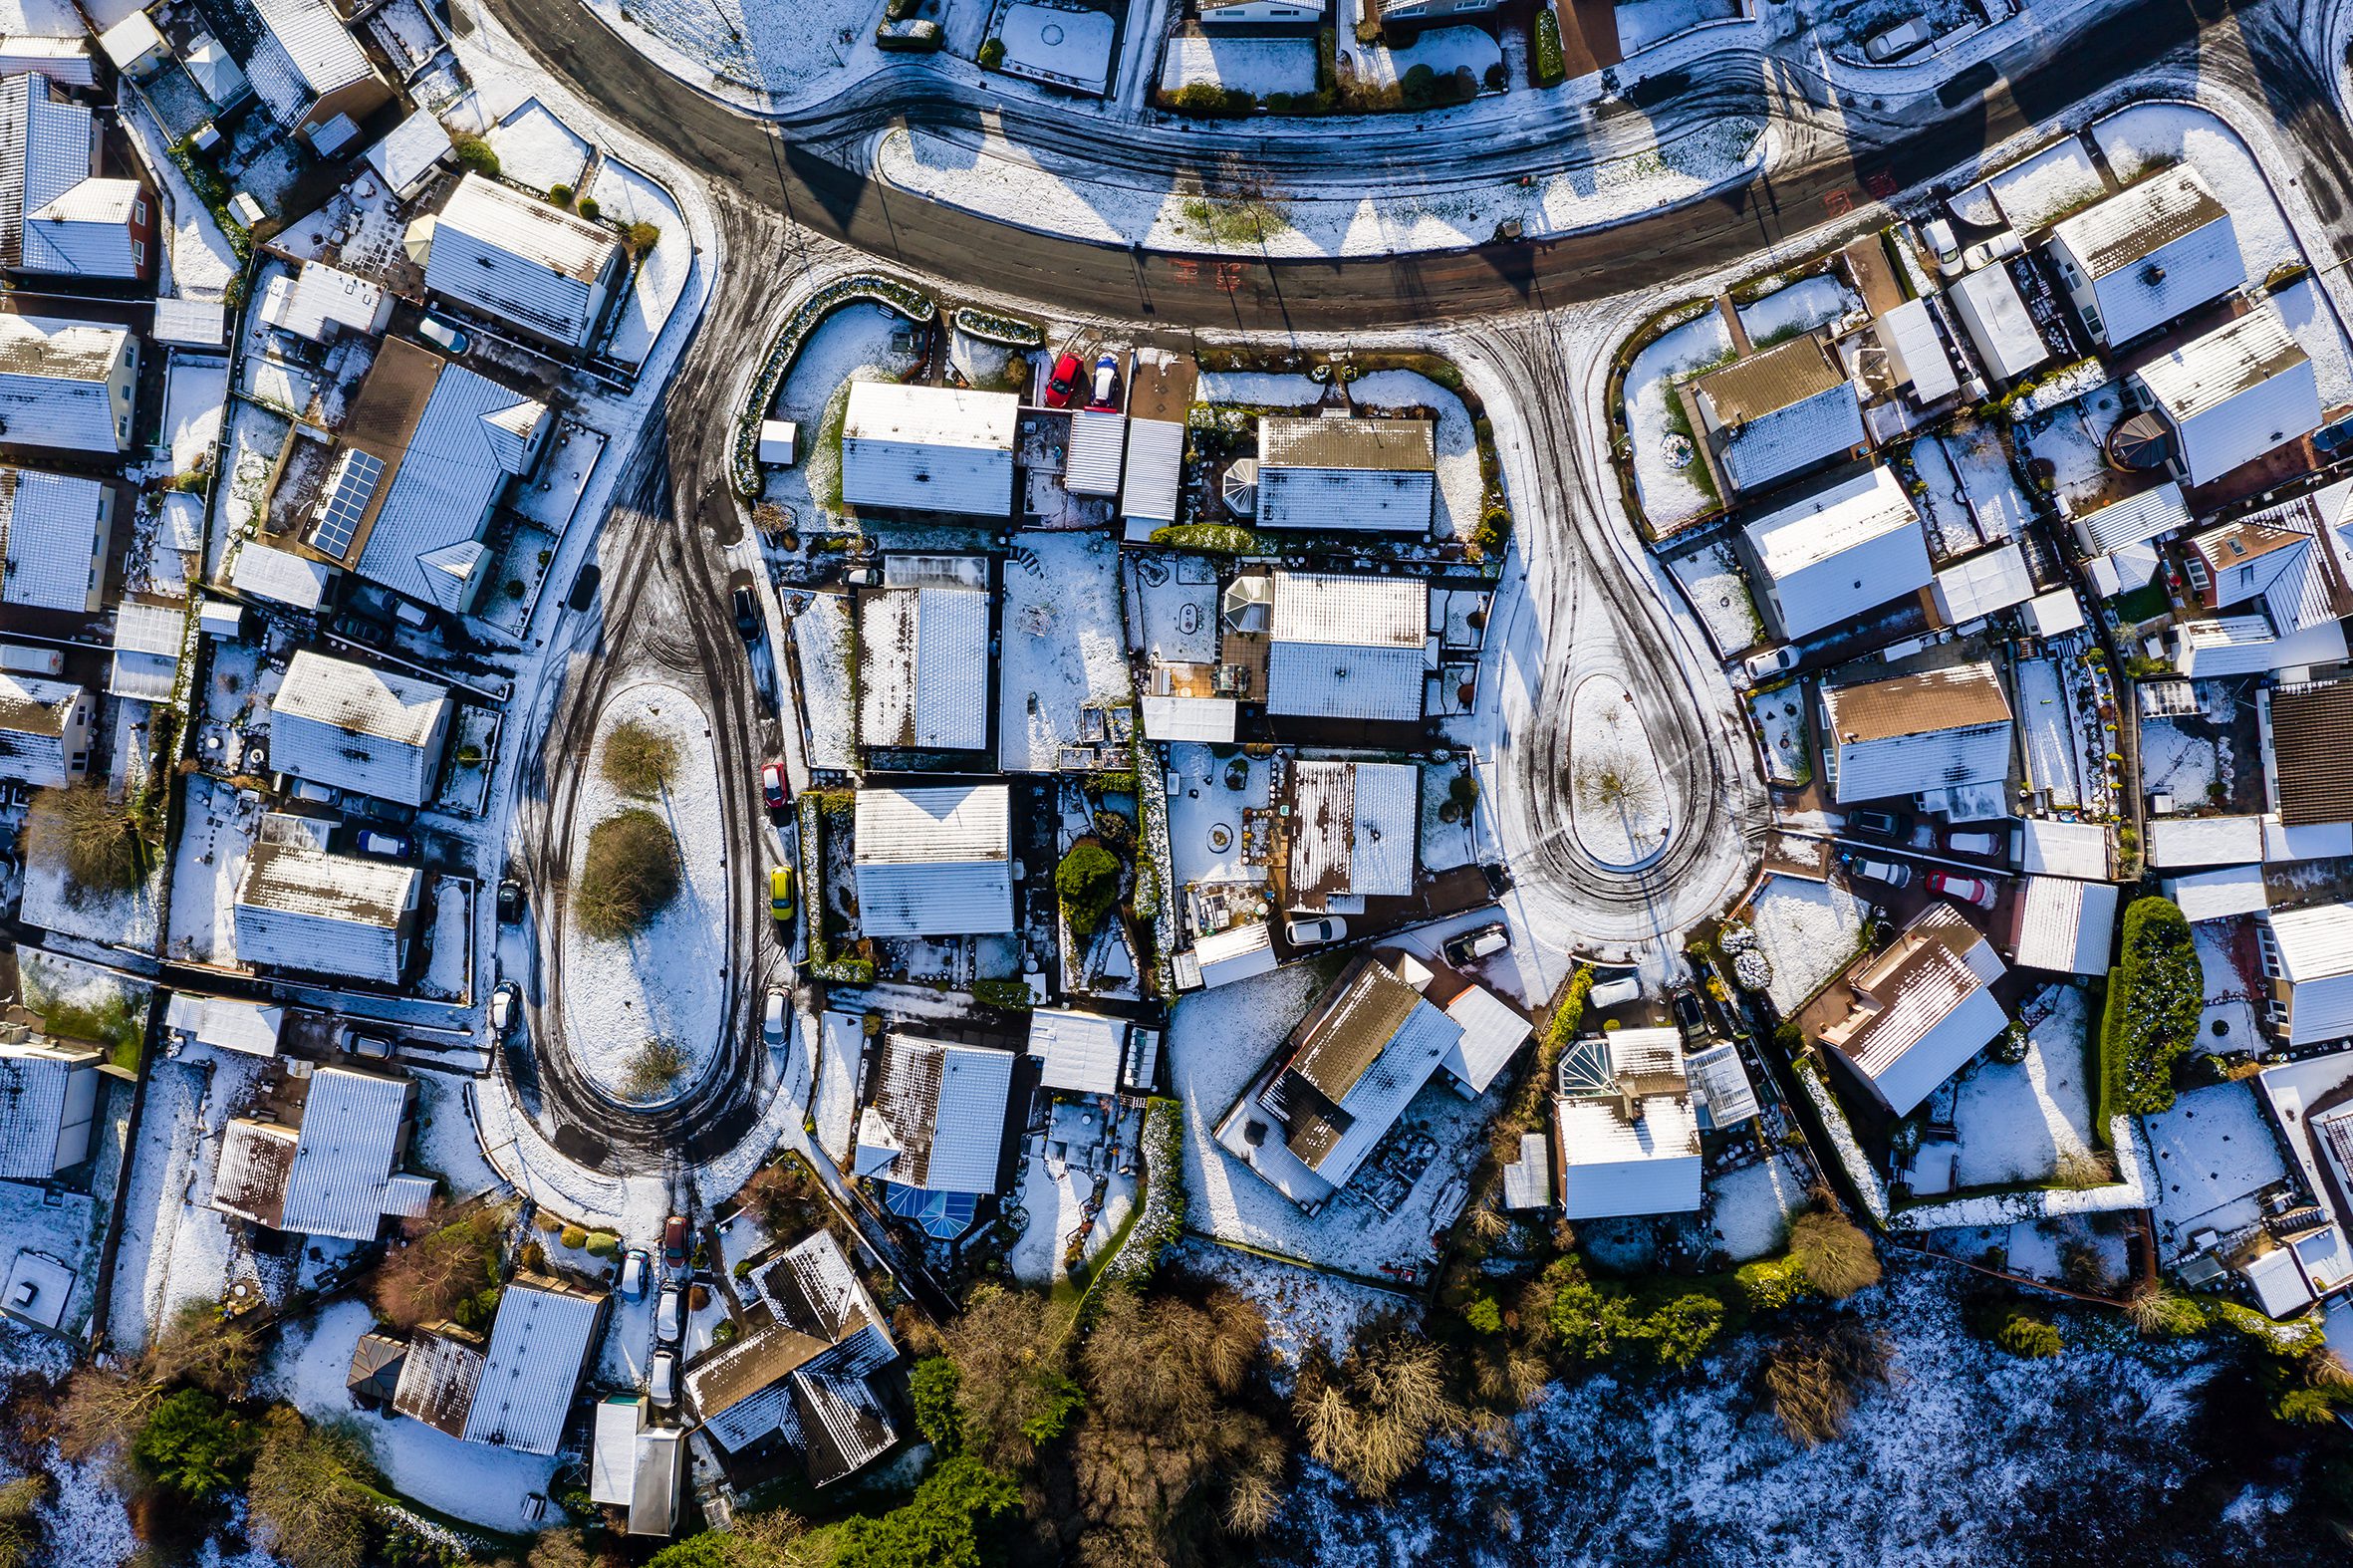 Homes in the snow